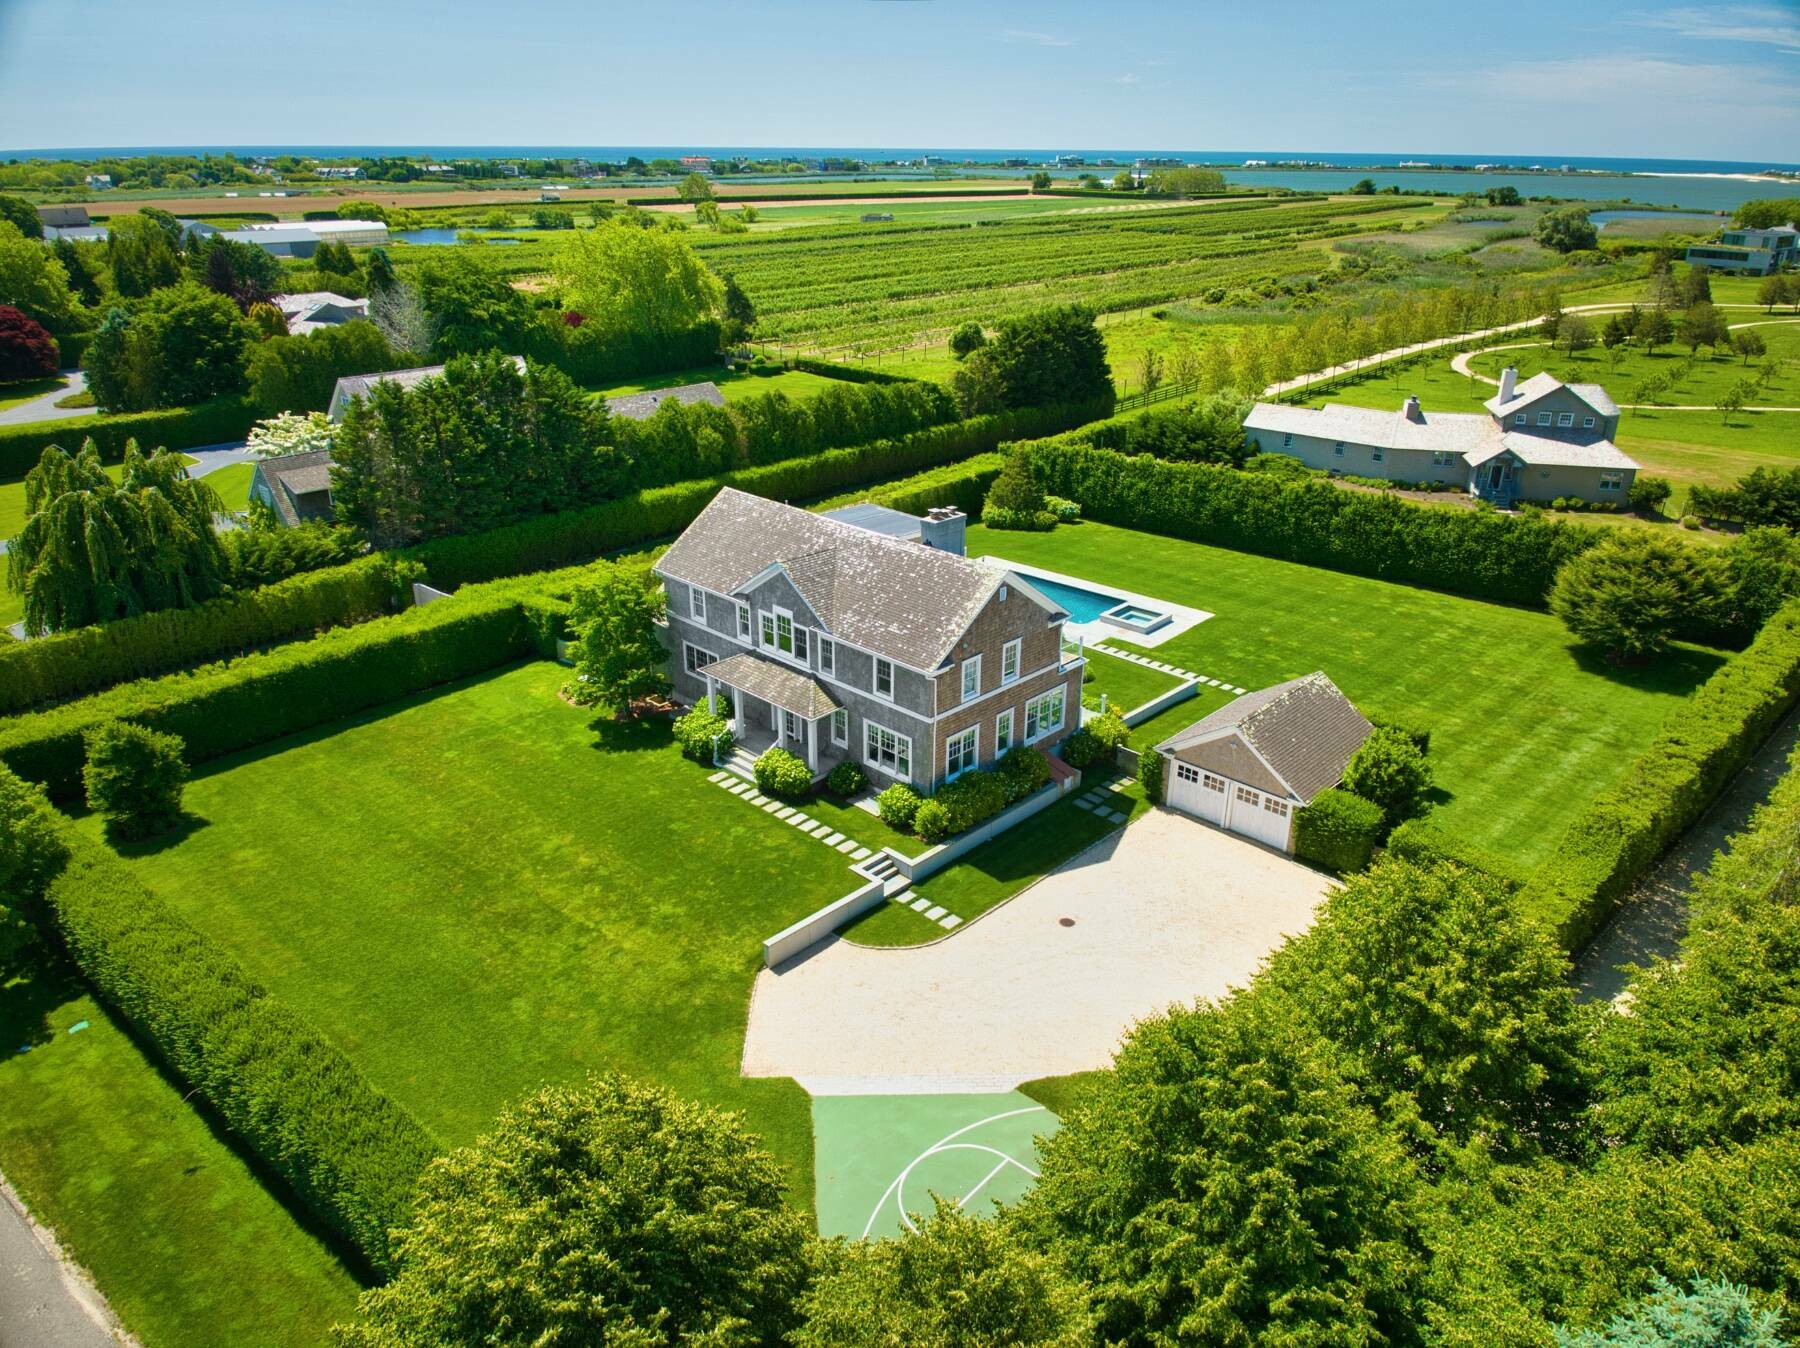 31 Mecox Bay Lane in Water Mill sold for $7.6 million. AERIAL HAMPTONS/COURTESY SOTHEBY'S INTERNATIONAL REALTY